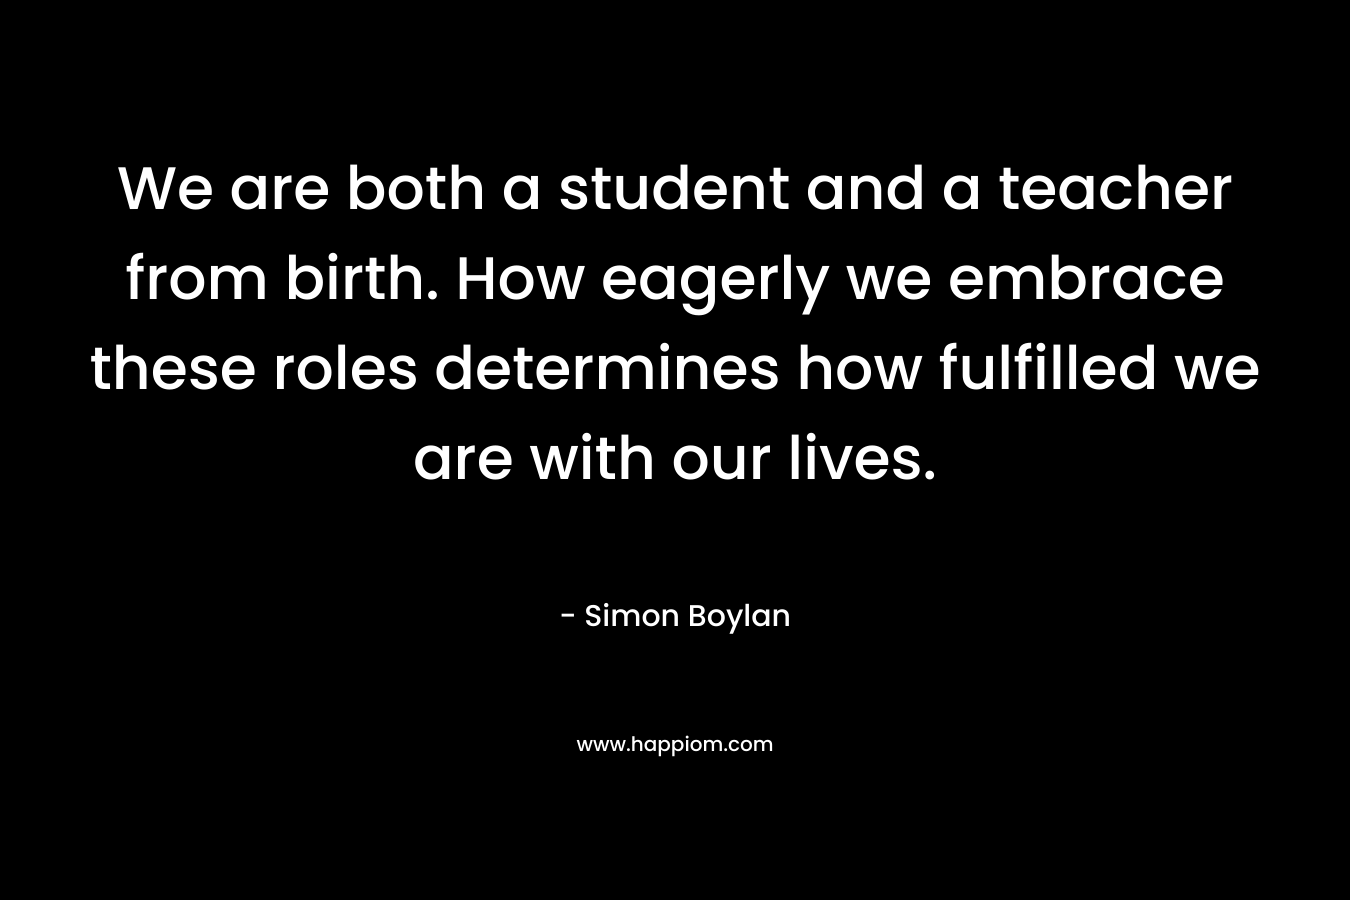 We are both a student and a teacher from birth. How eagerly we embrace these roles determines how fulfilled we are with our lives. – Simon Boylan